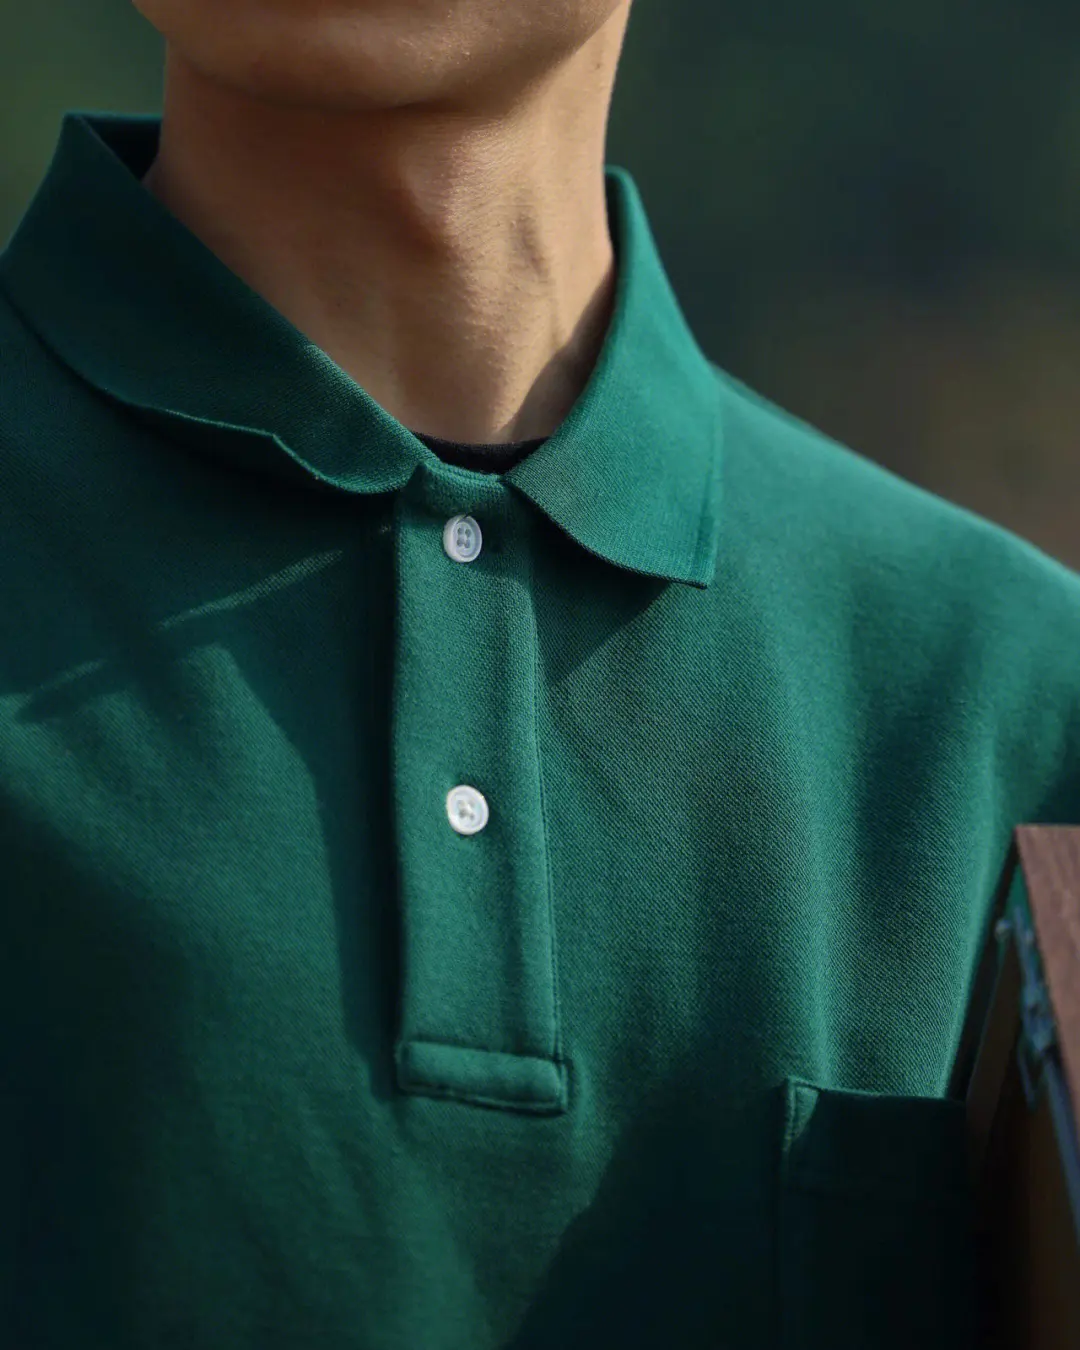 The polo shirt is stylish and light. It's methodical.